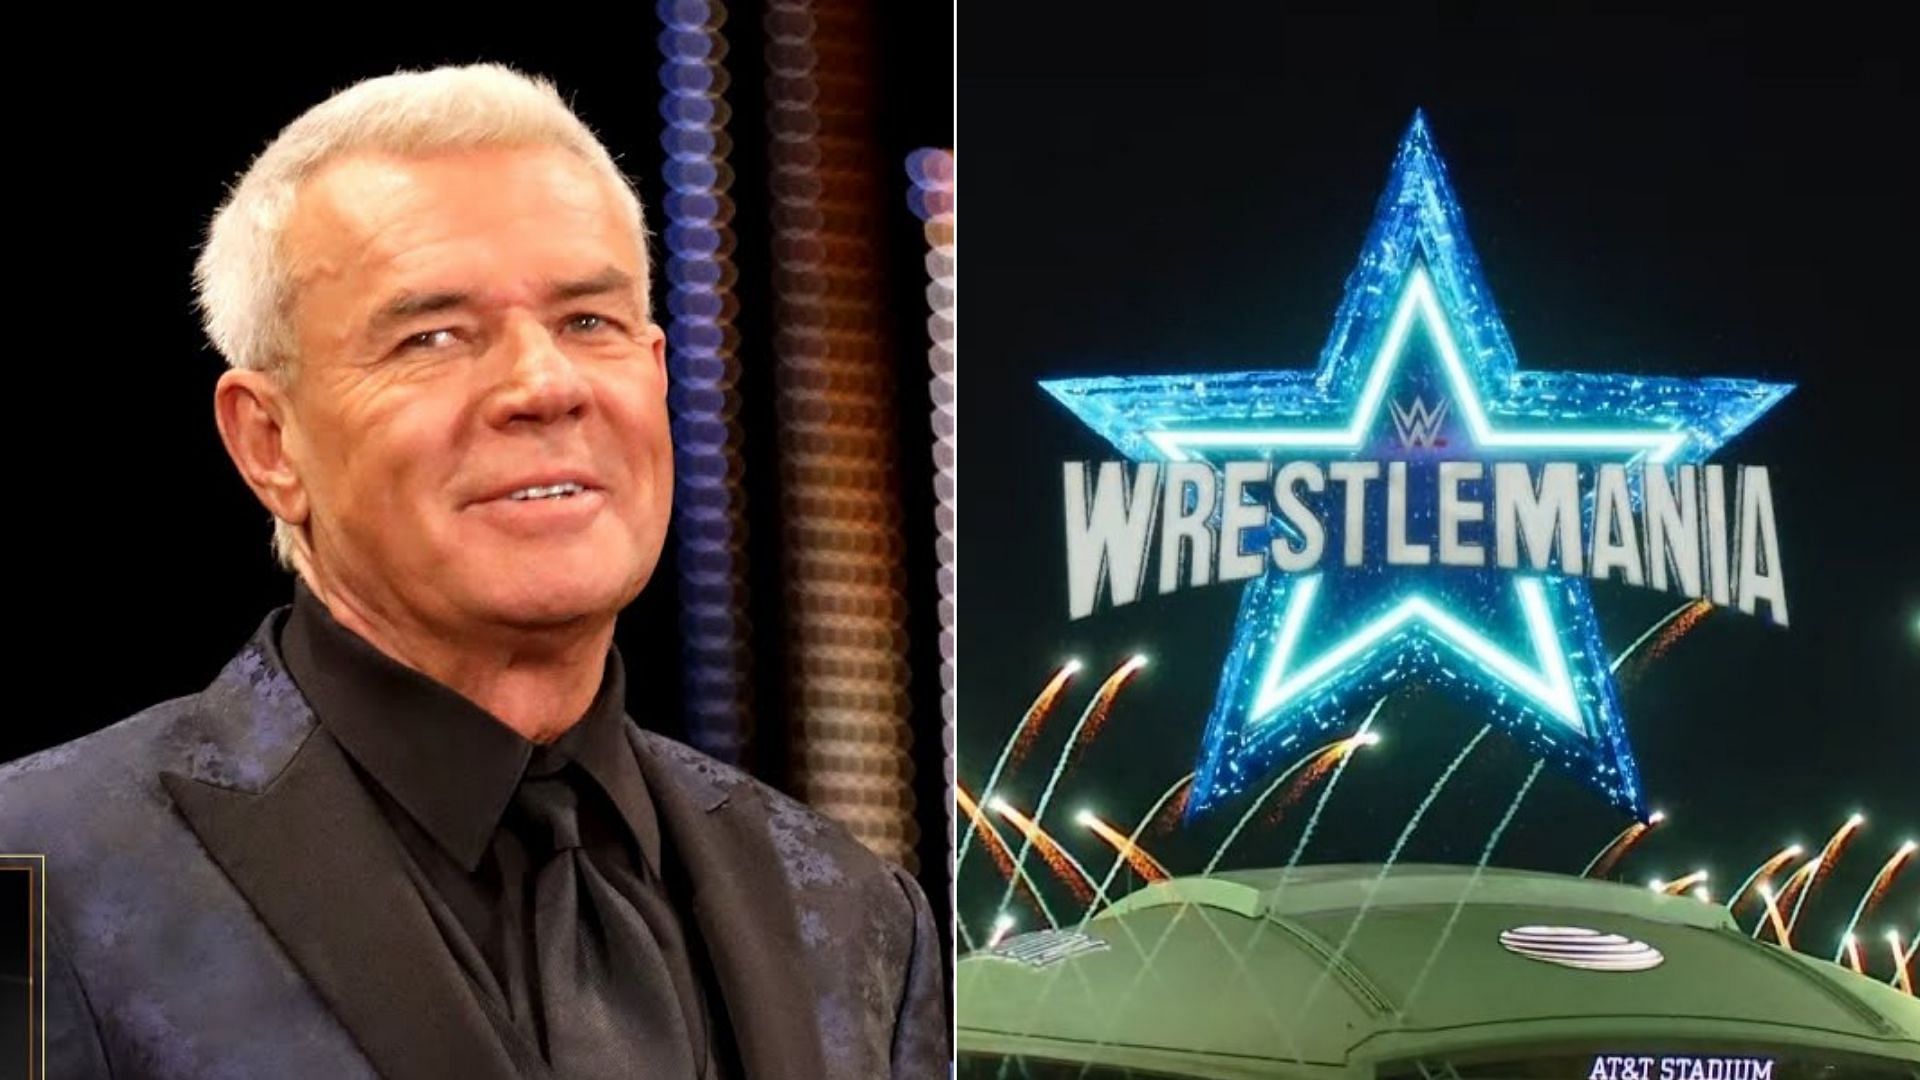 Eric Bischoff has enjoyed this top superstar&#039;s latest character